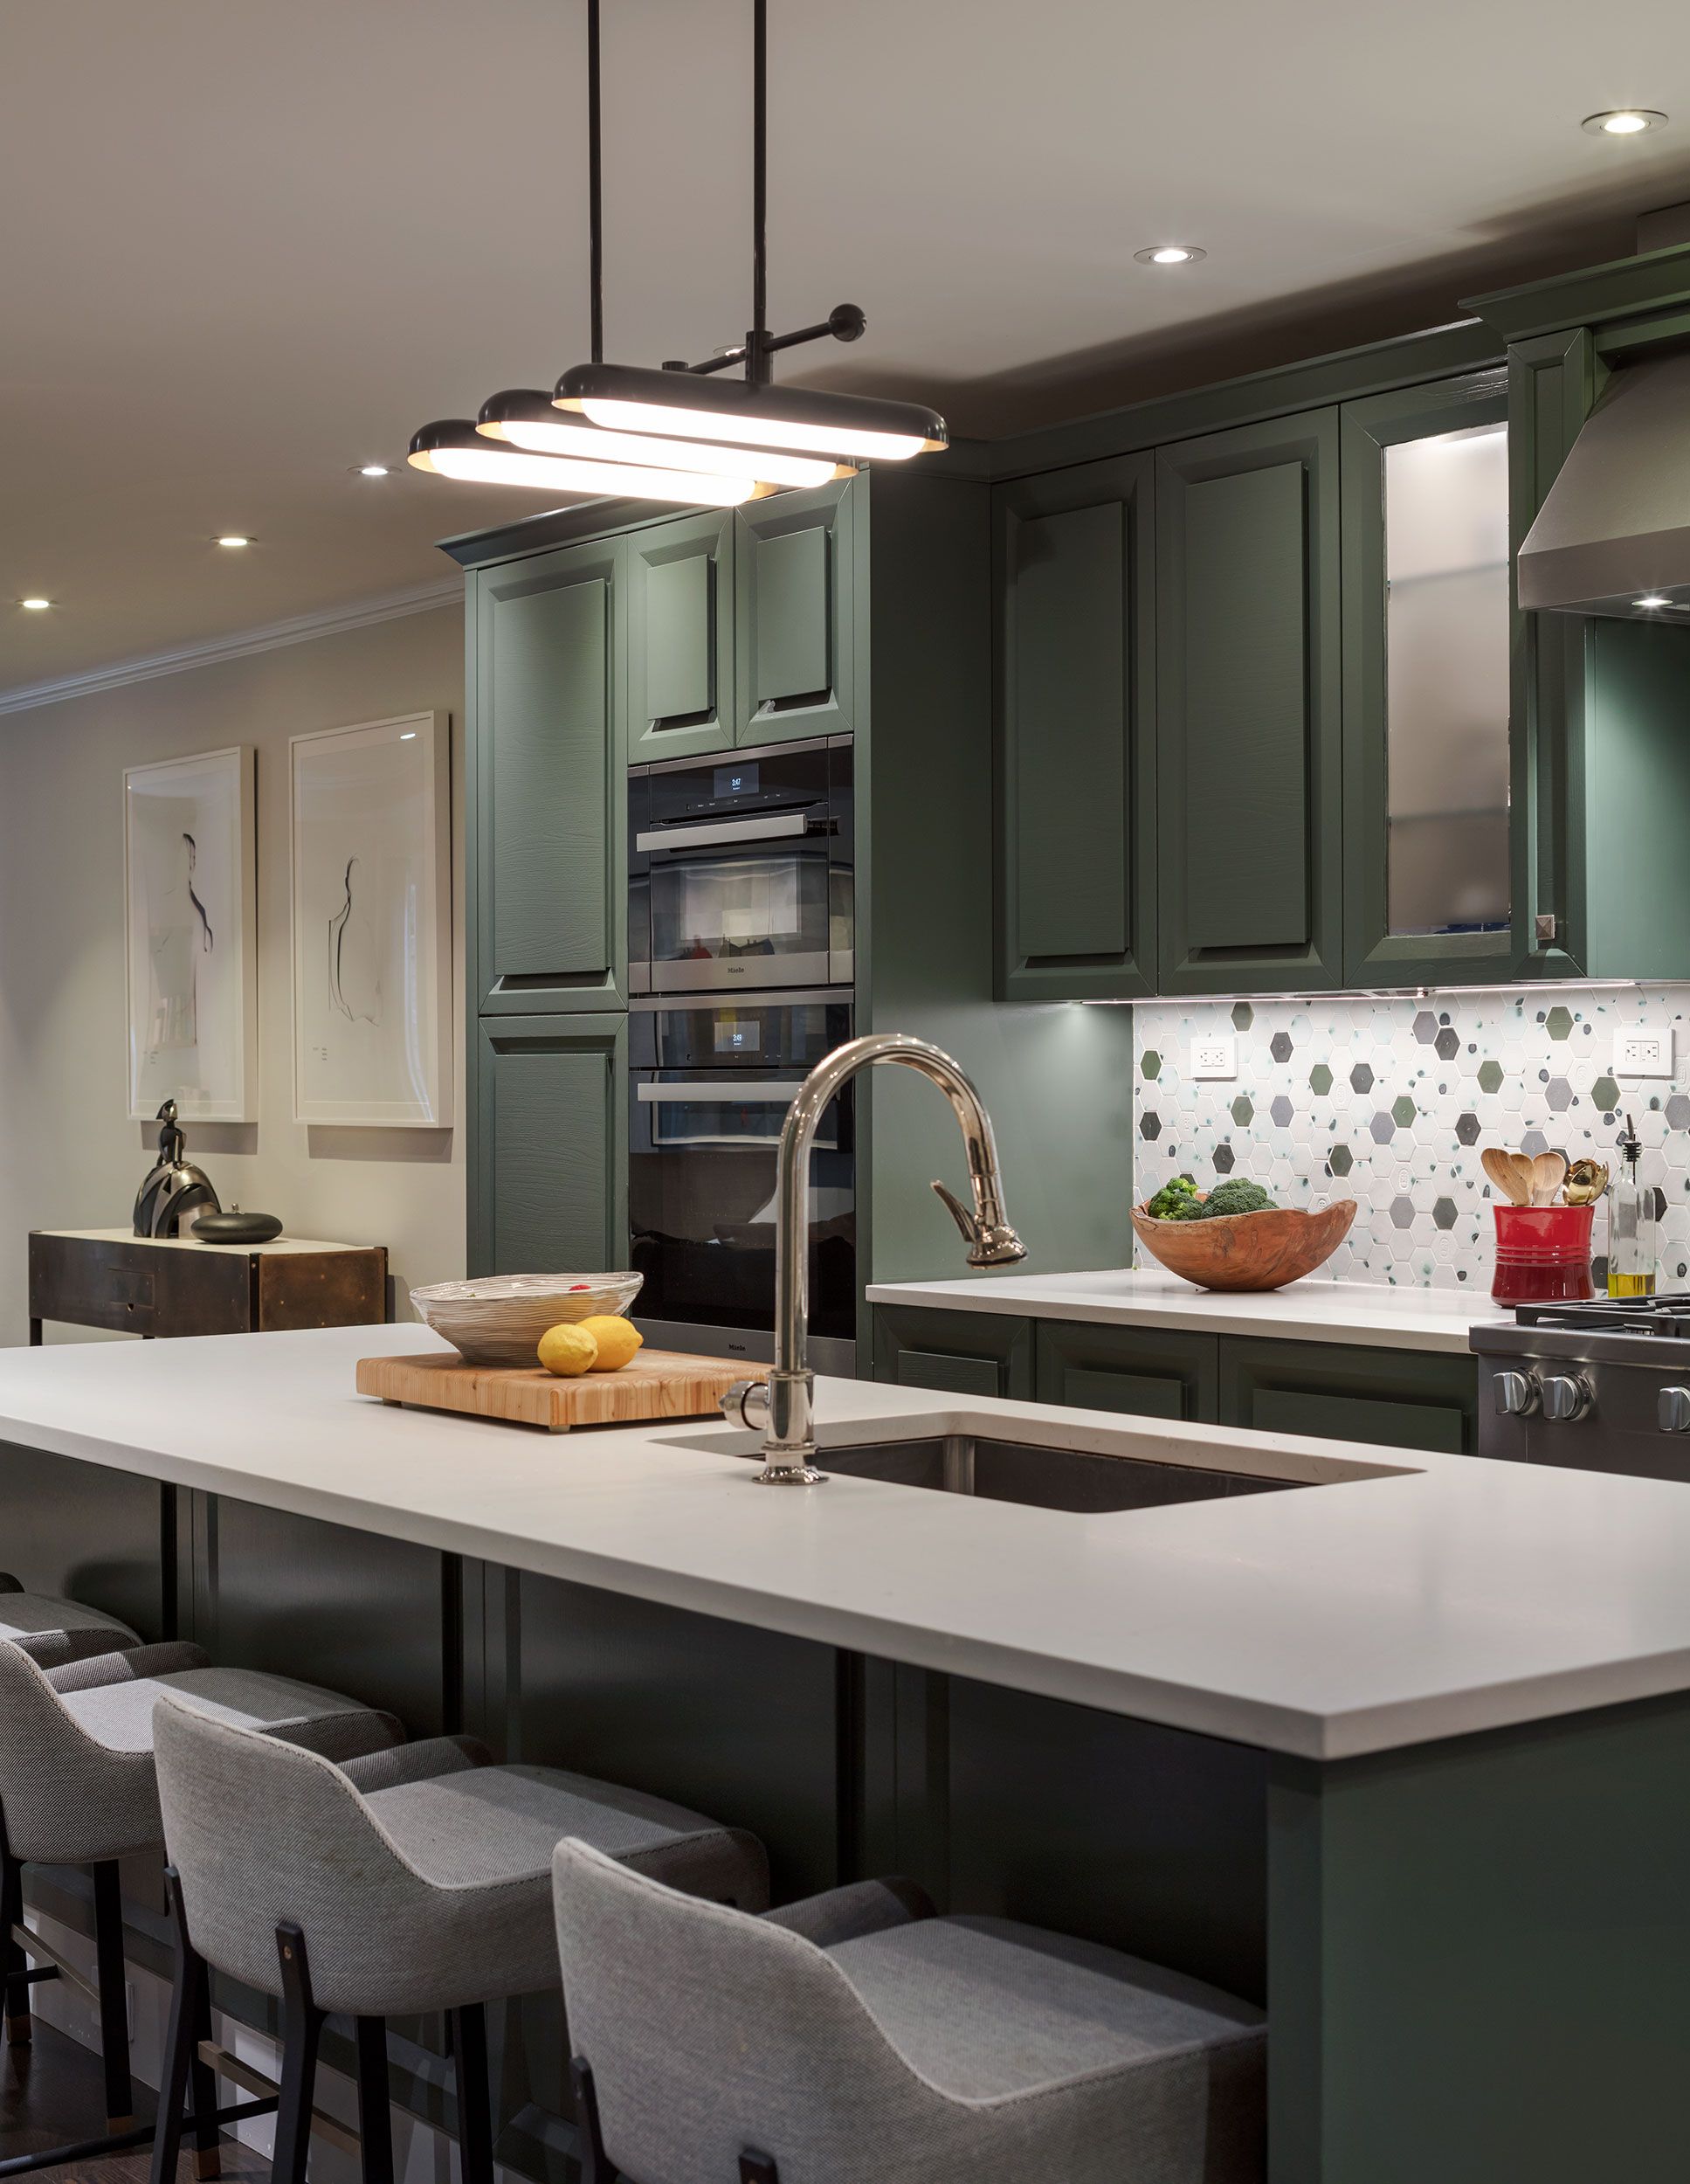 These 32 Examples Prove the Versatility of Green Kitchen Cabinets